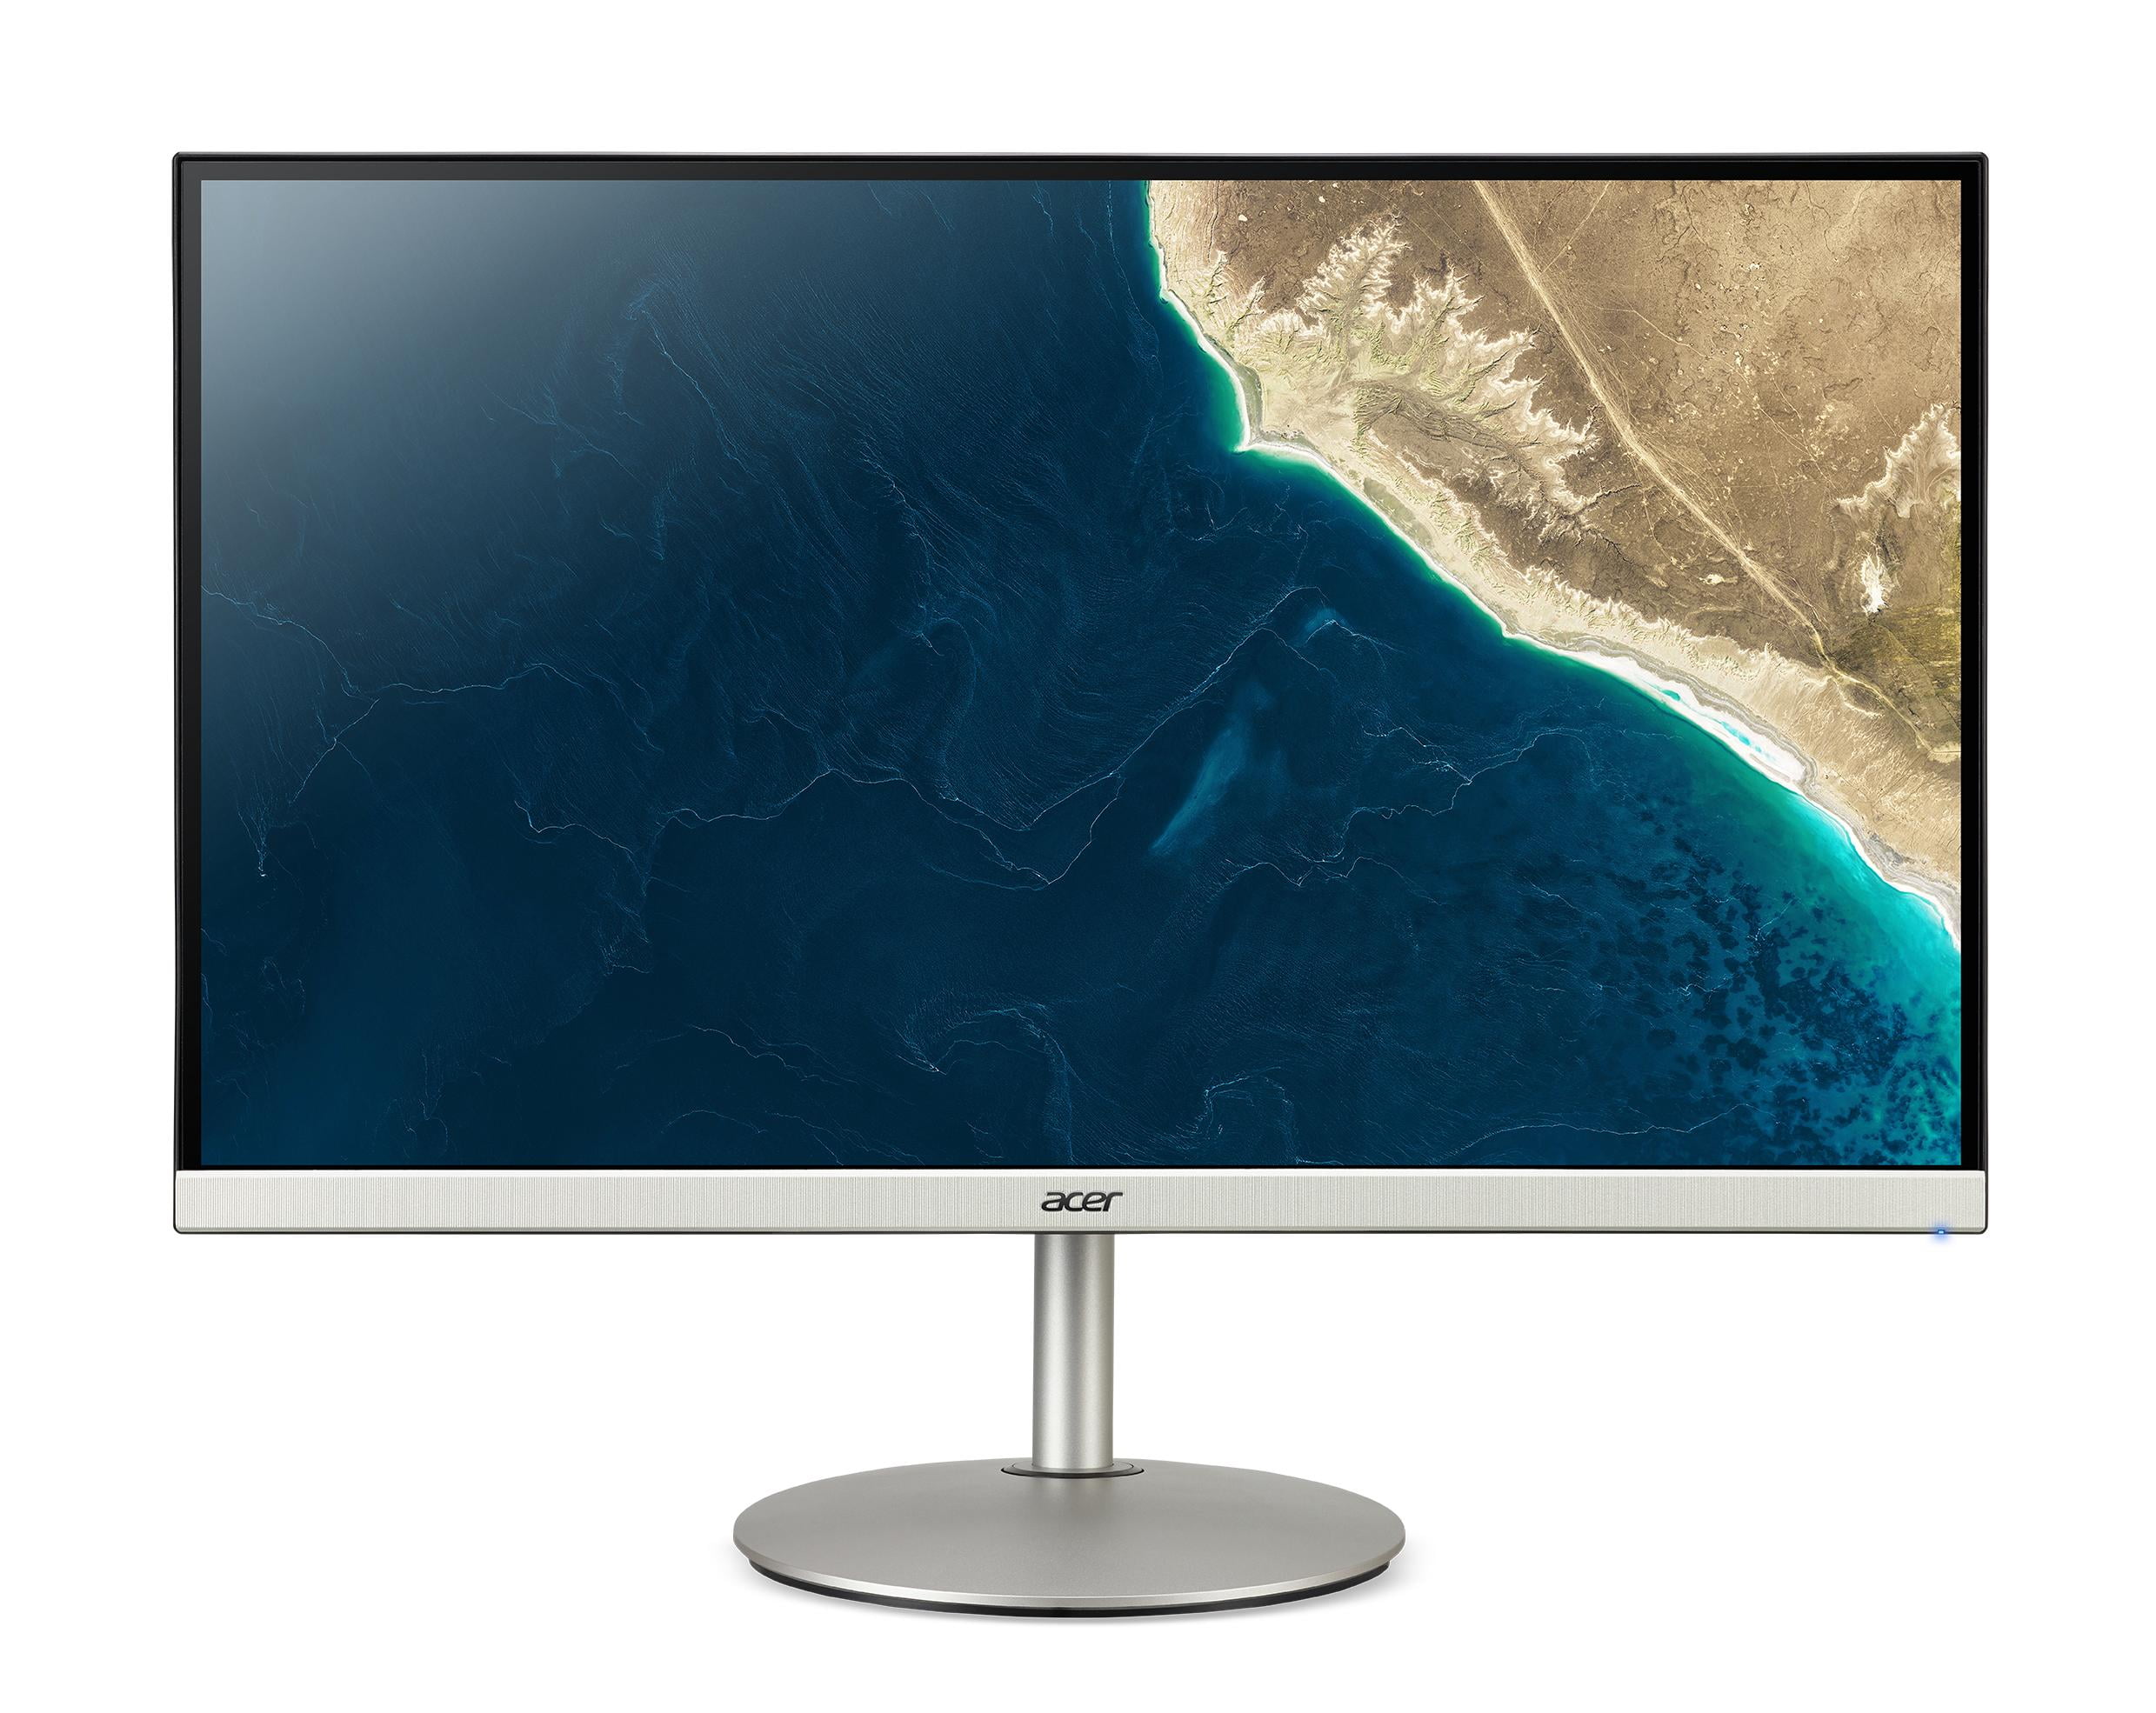 Acer 23.8” Full HD (1920 x 1080) Ultra-Thin IPS Monitor with AMD 